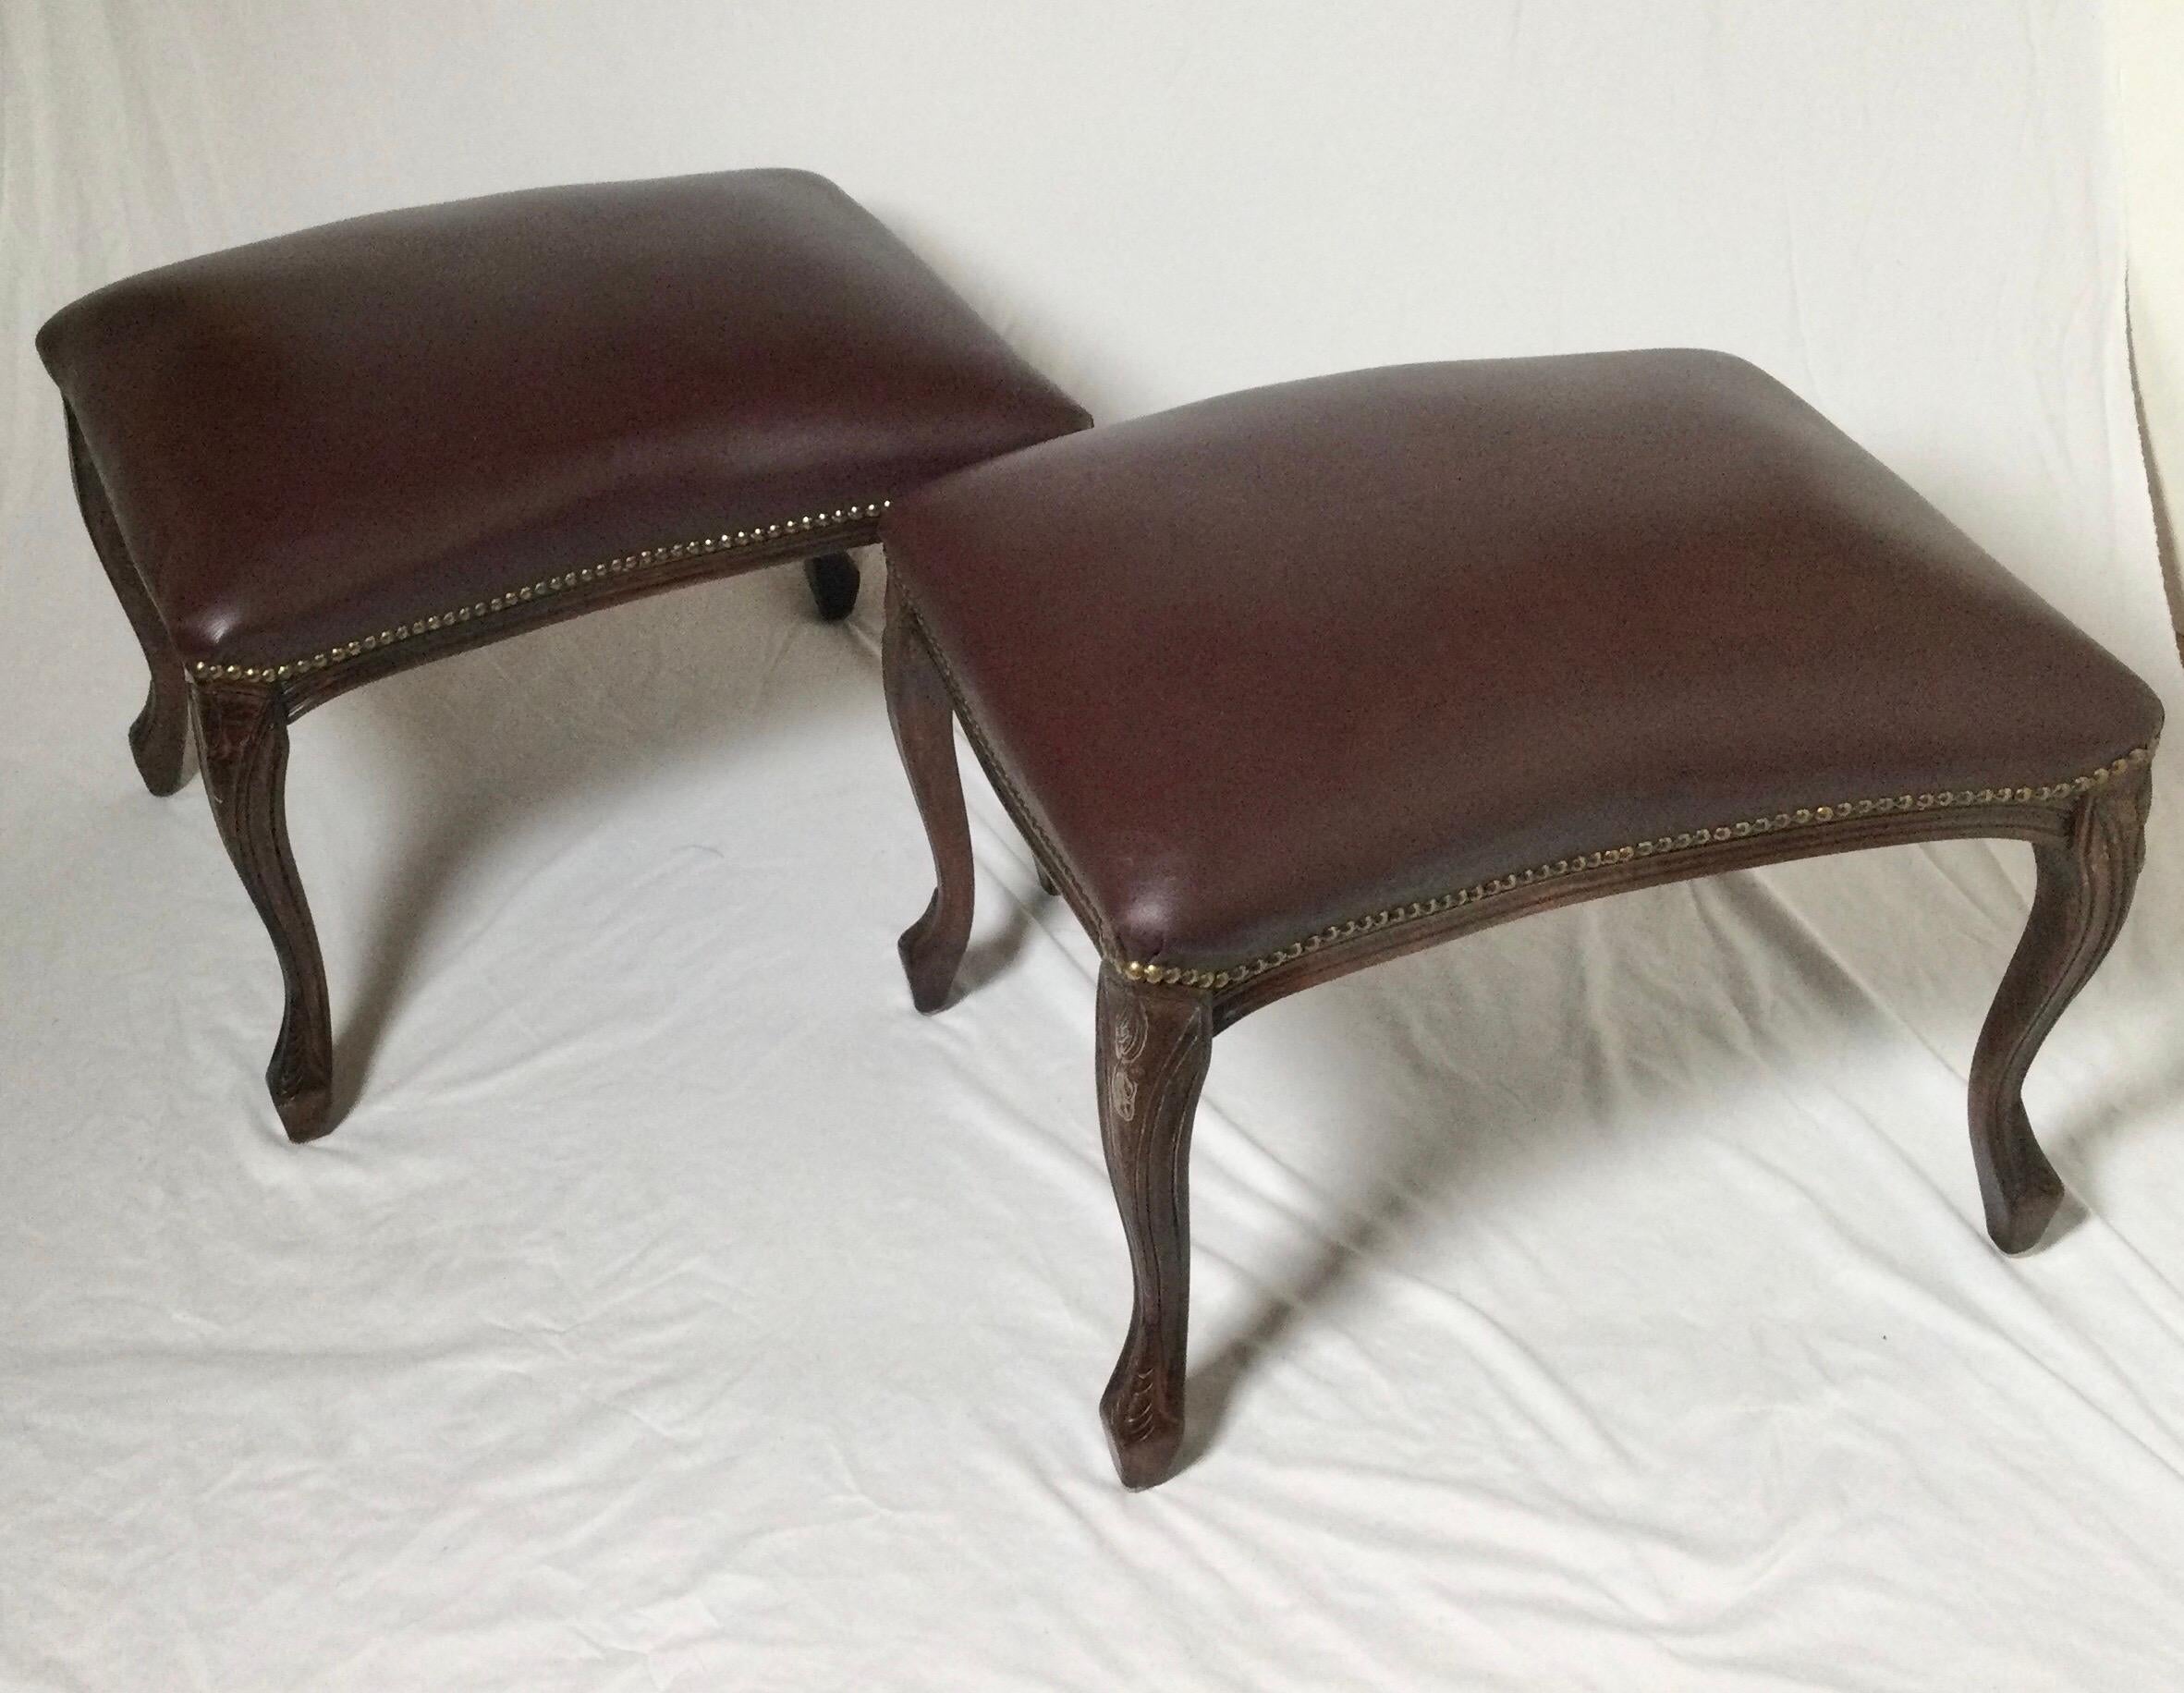 A pair of brown leather and dark walnut curved benches. The carve wood bases with tabboco brown leather tops with antiqued nailhead trim. A prefect pair.